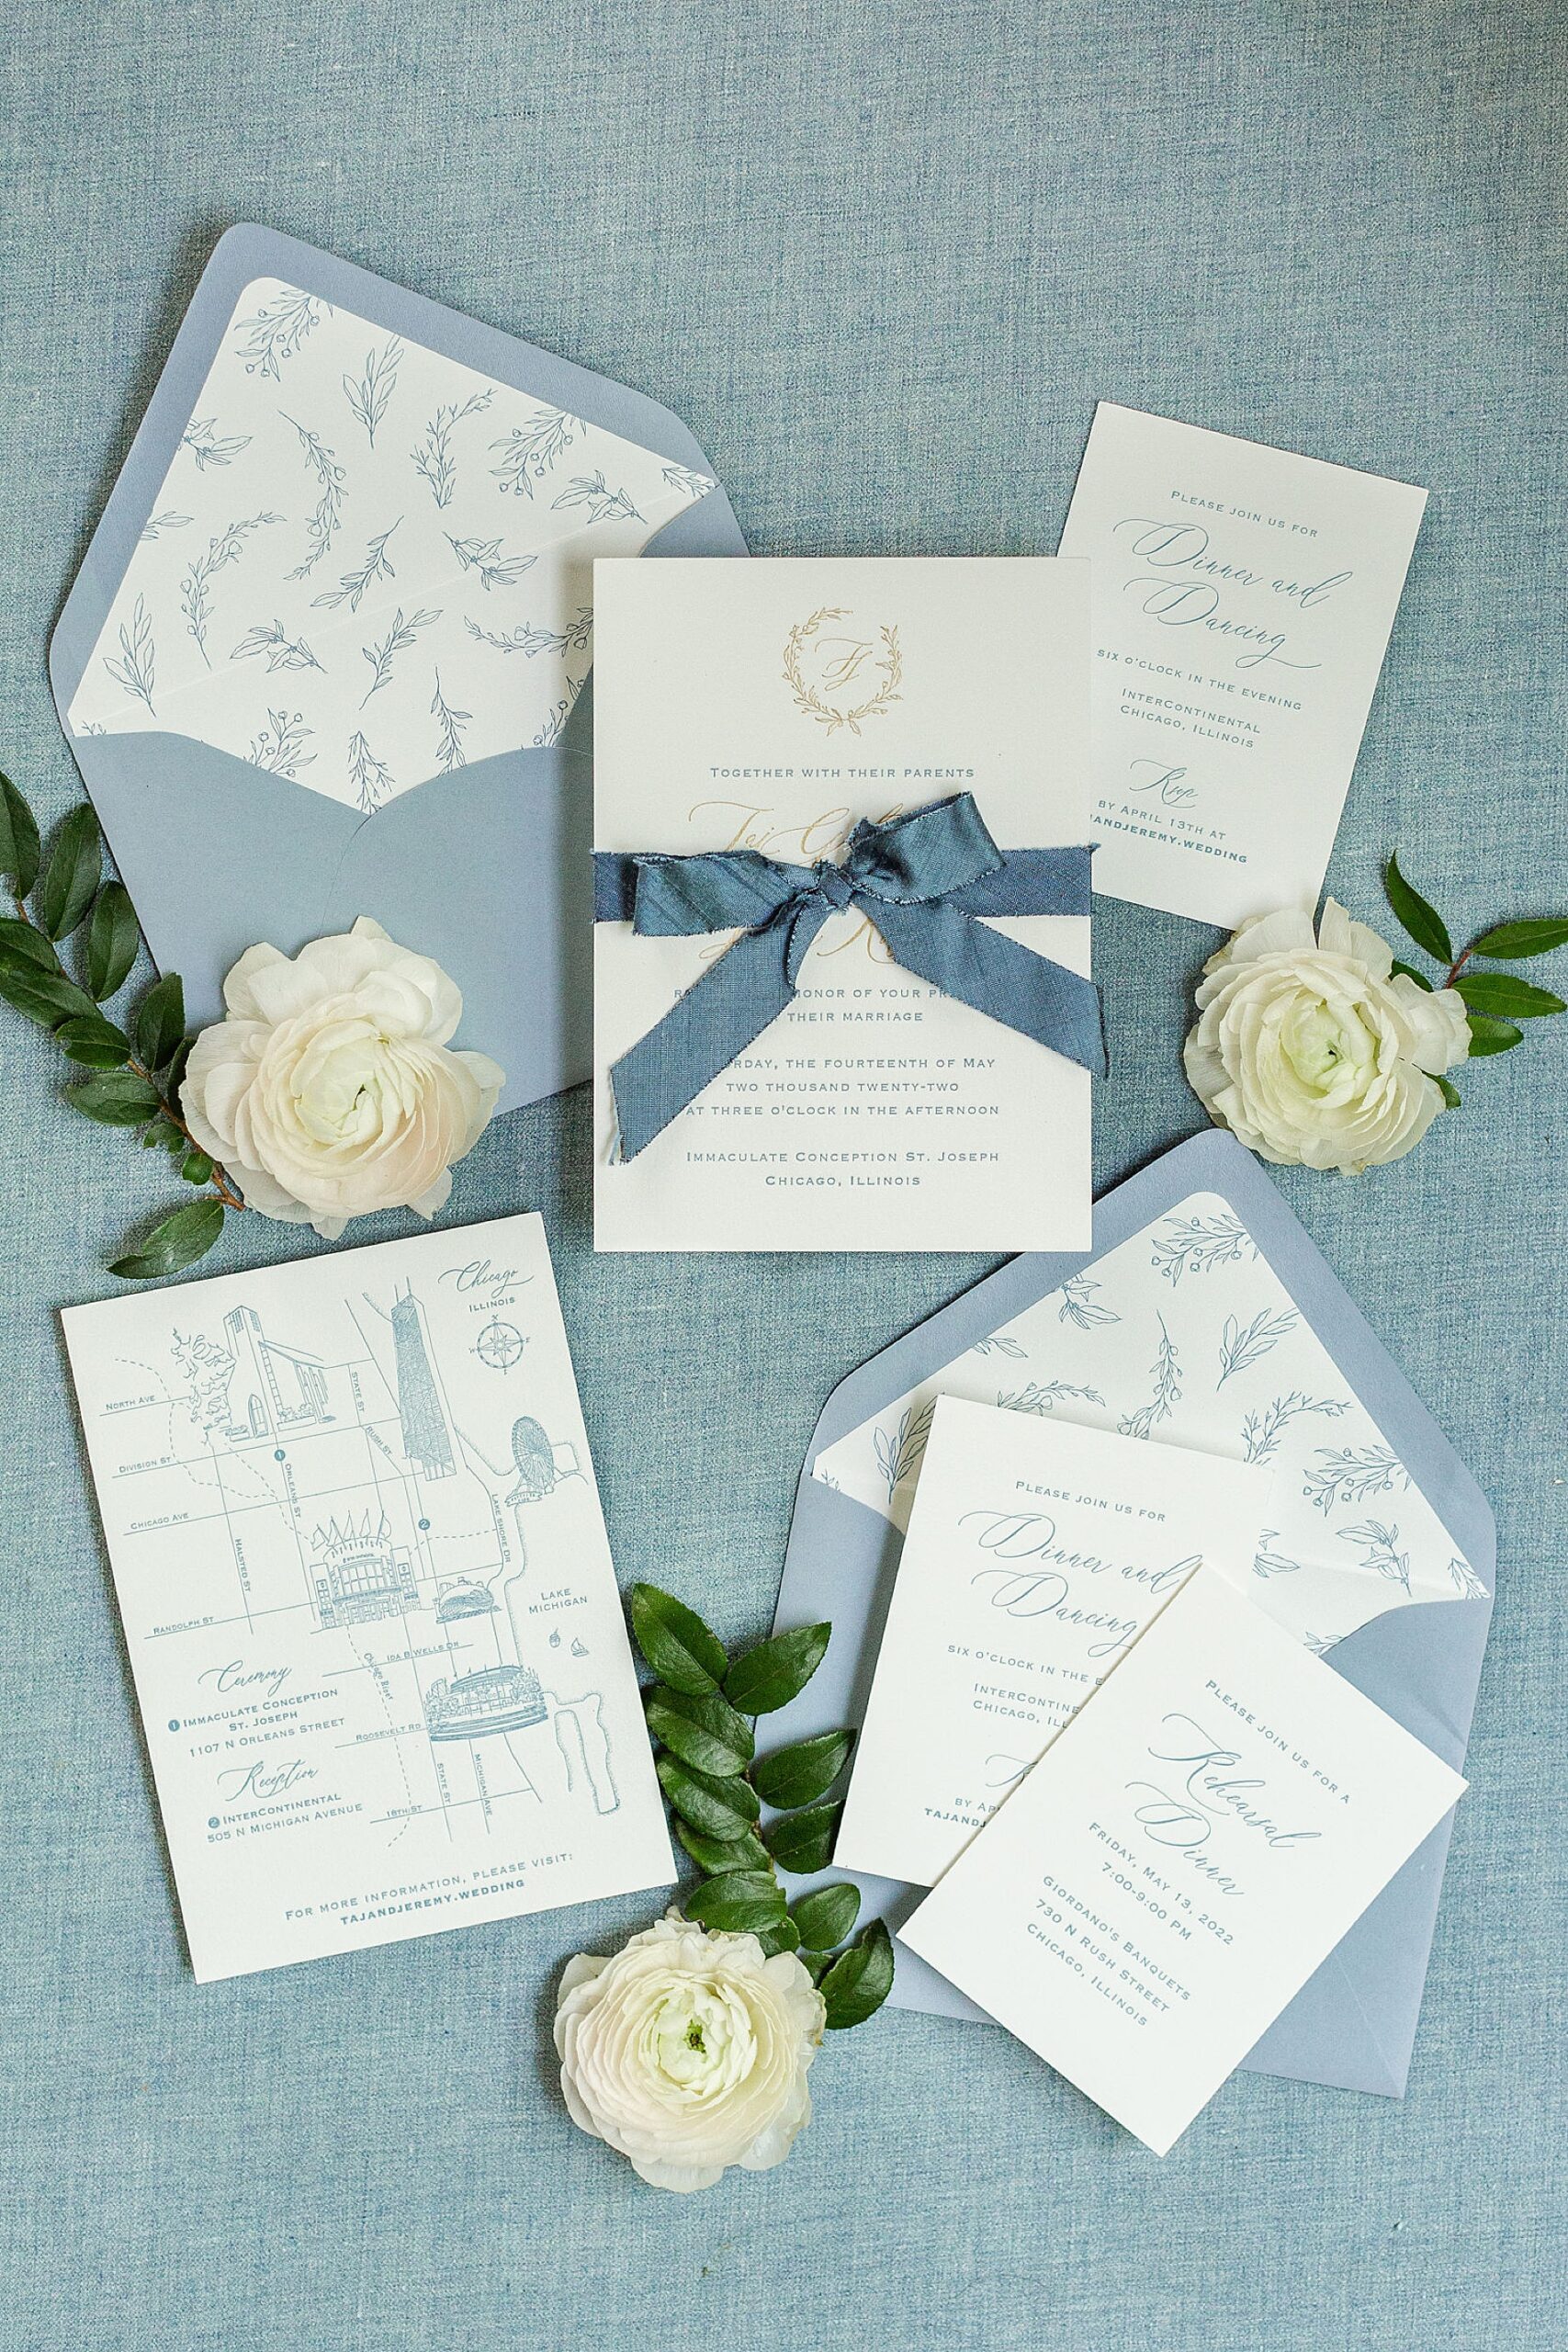 wedding invitations and details 